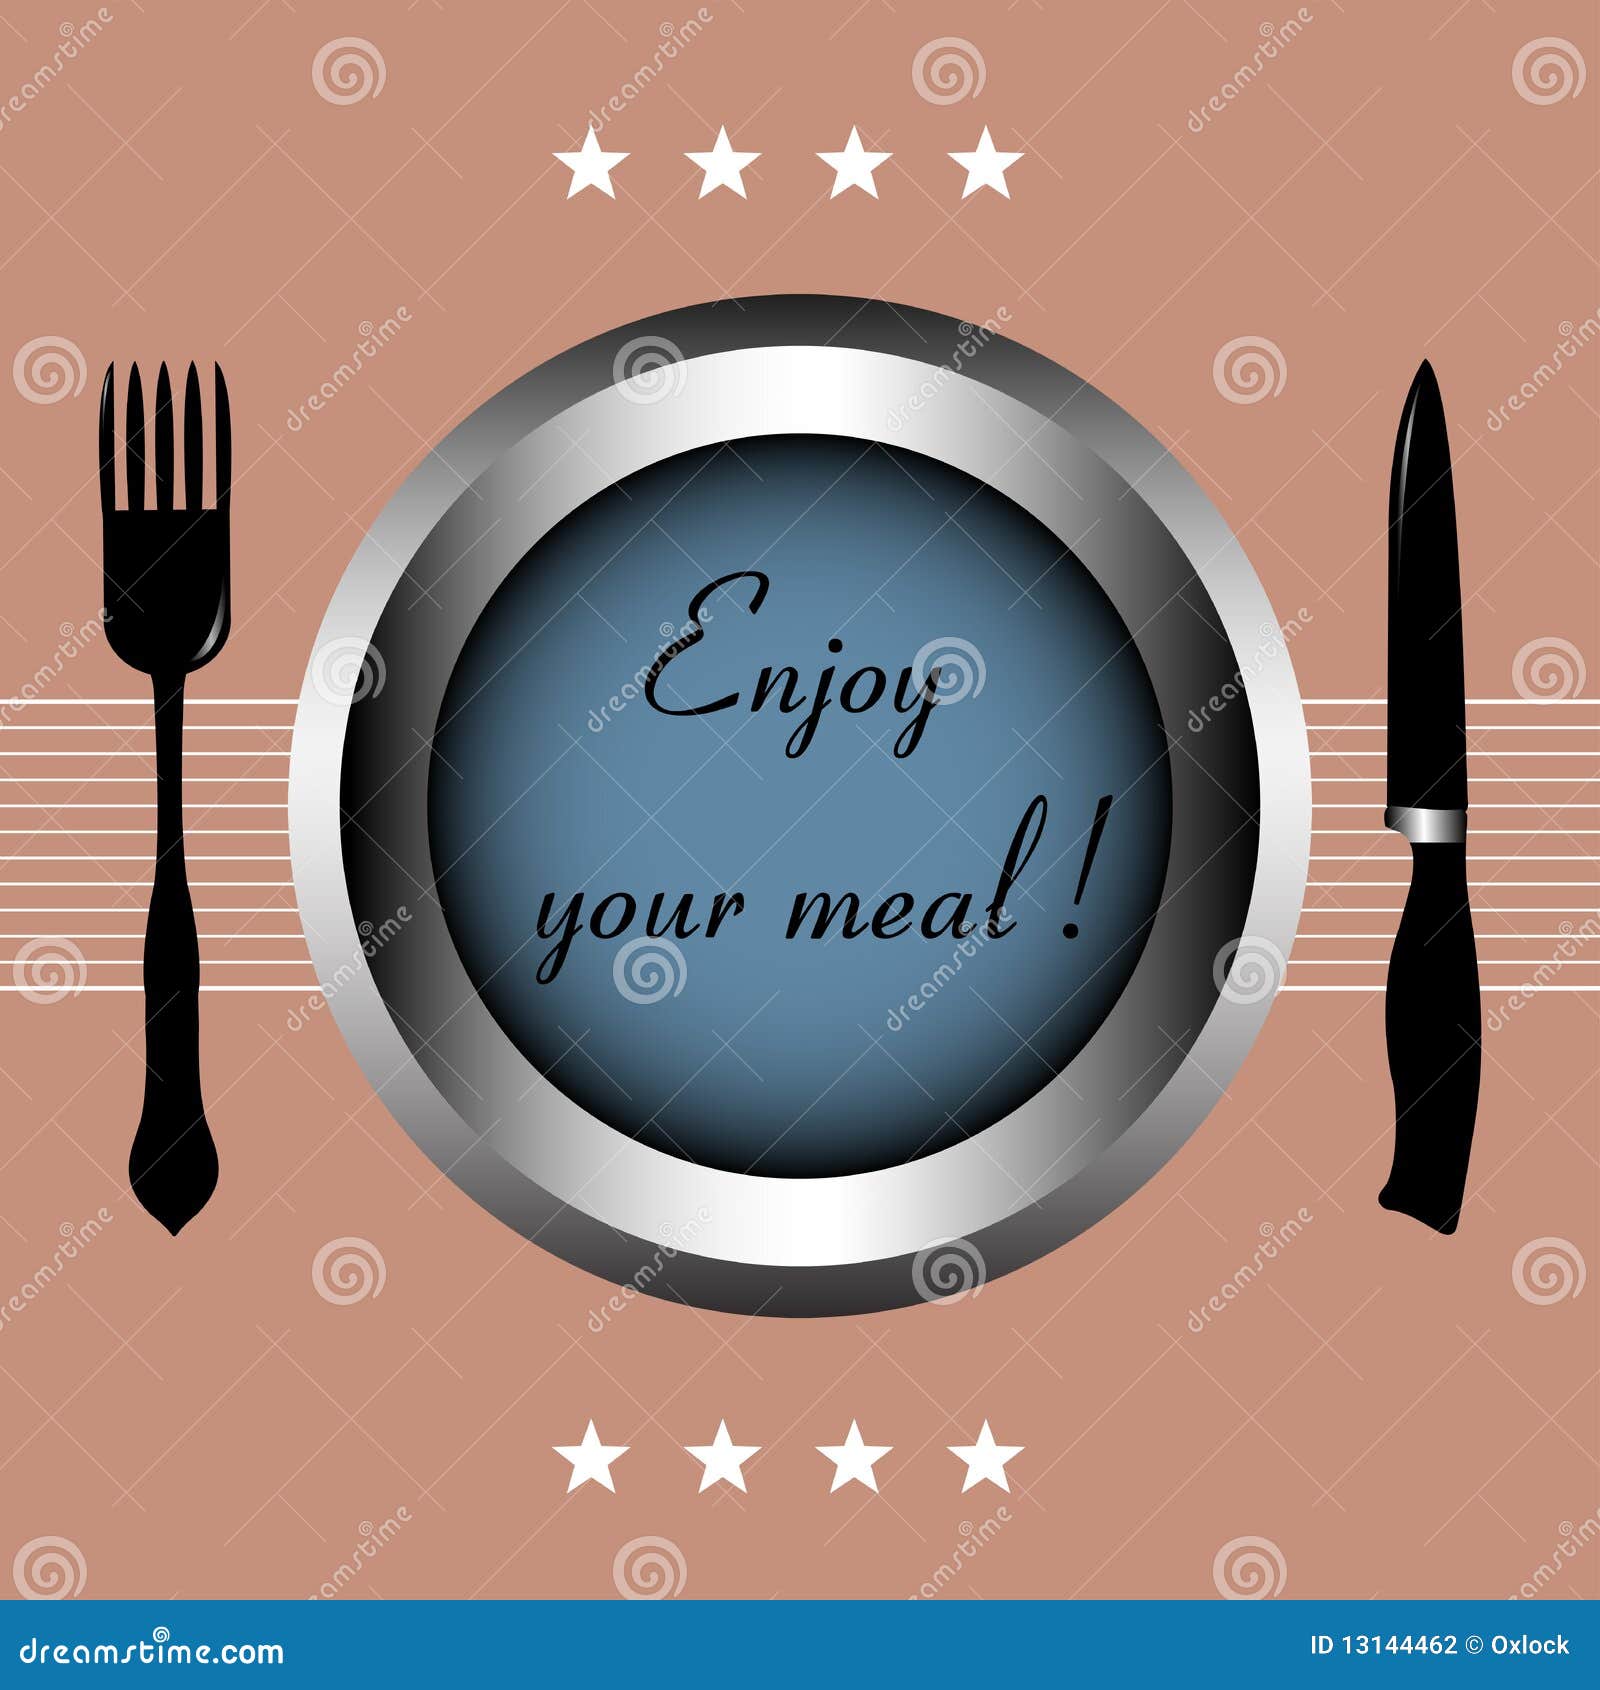 Enjoy Your Meal Stock Photography - Image: 13144462